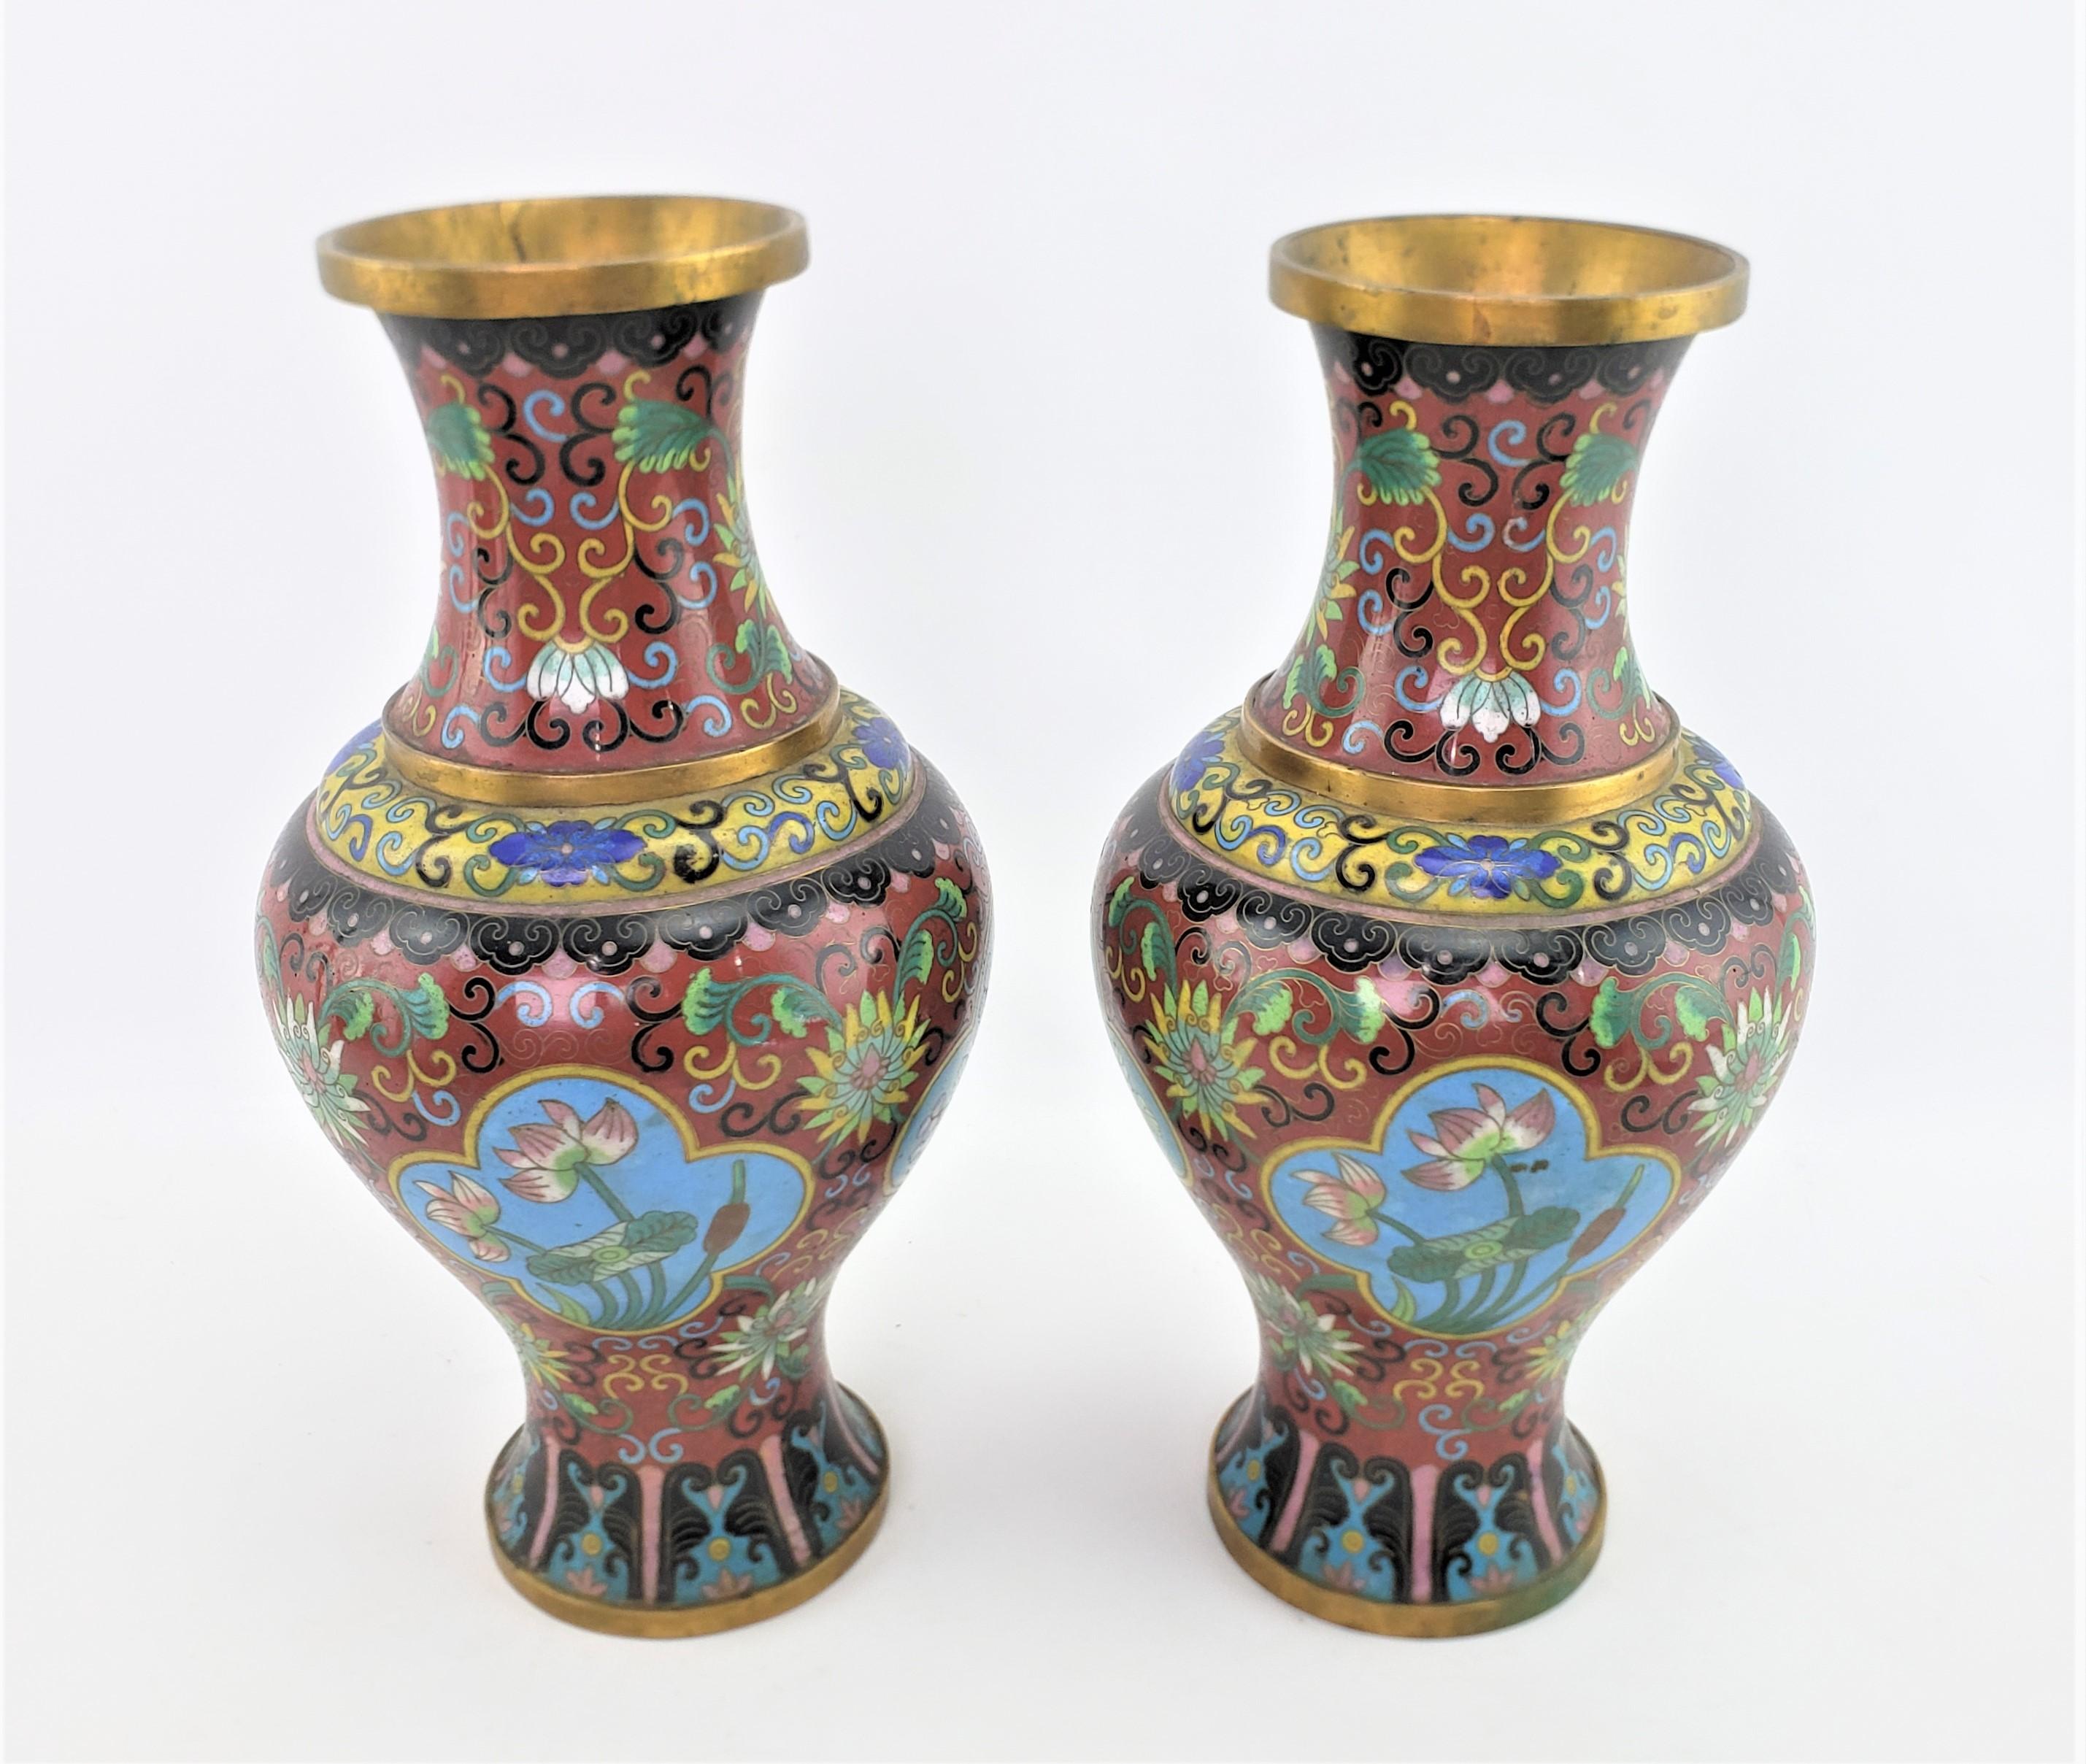 Chinese Export Pair of Early Chinese Republic Era Cloisonne Vases with Stylized Floral Motif For Sale